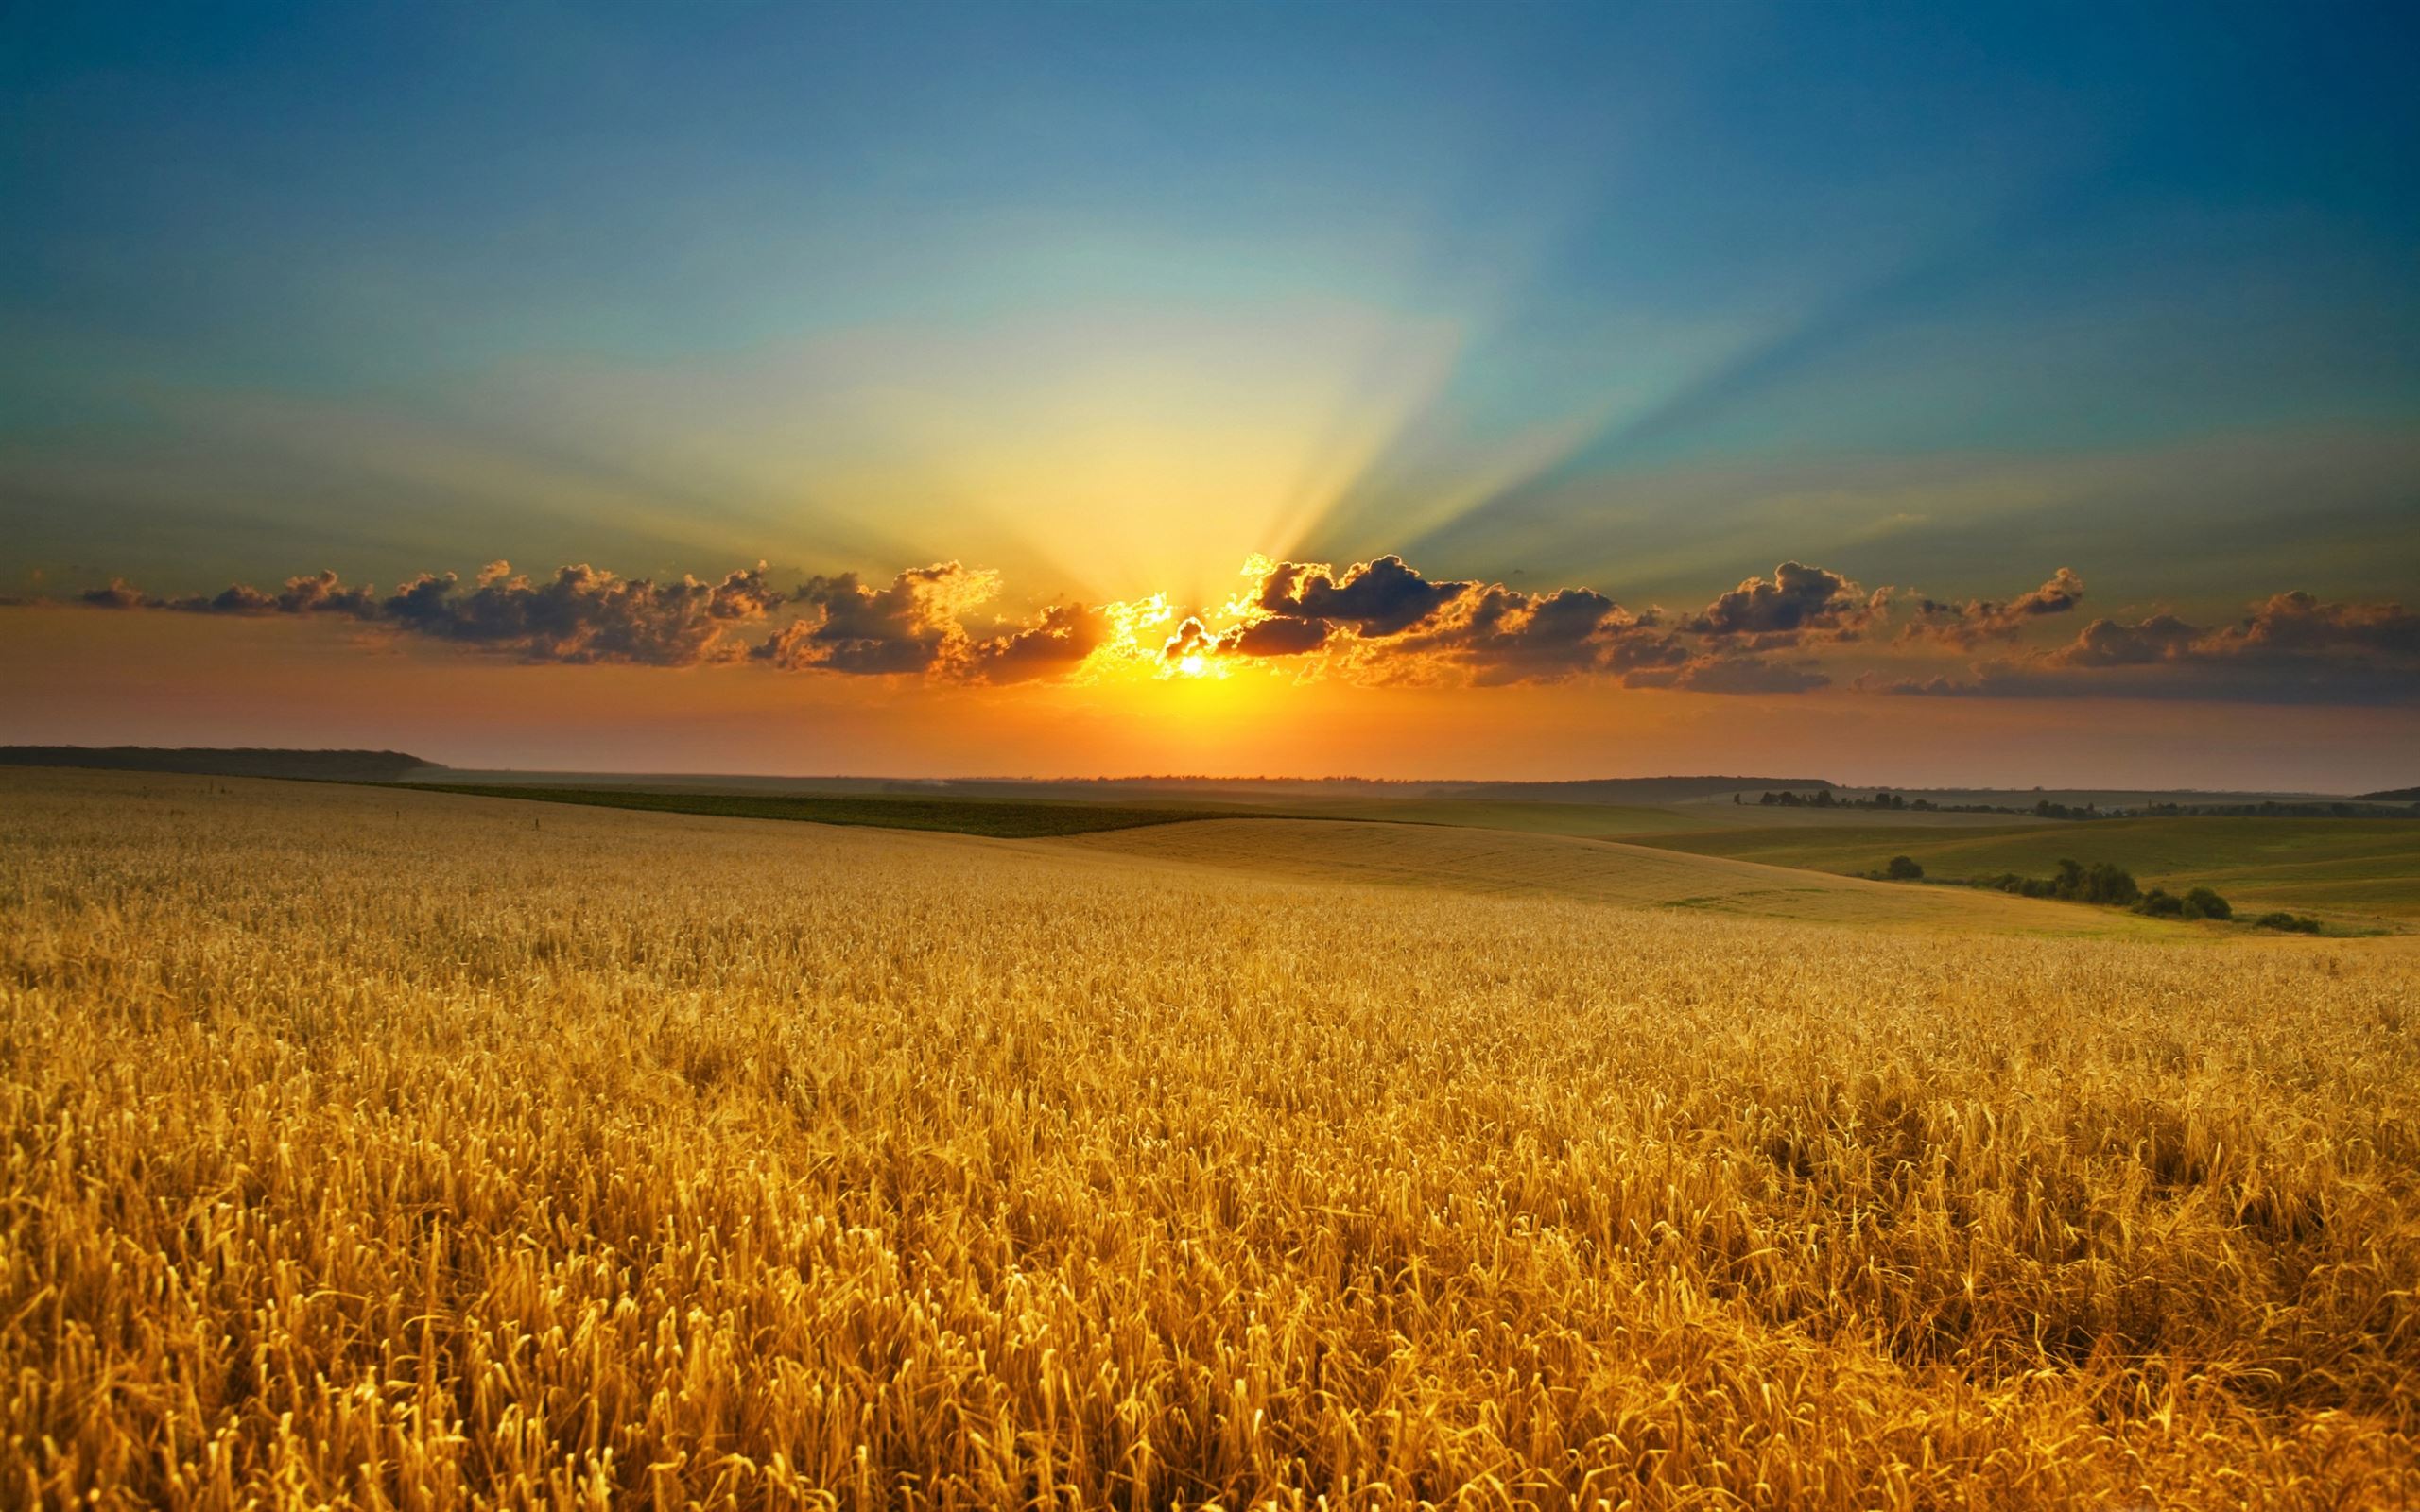 A sunset over a field of wheat - Farm